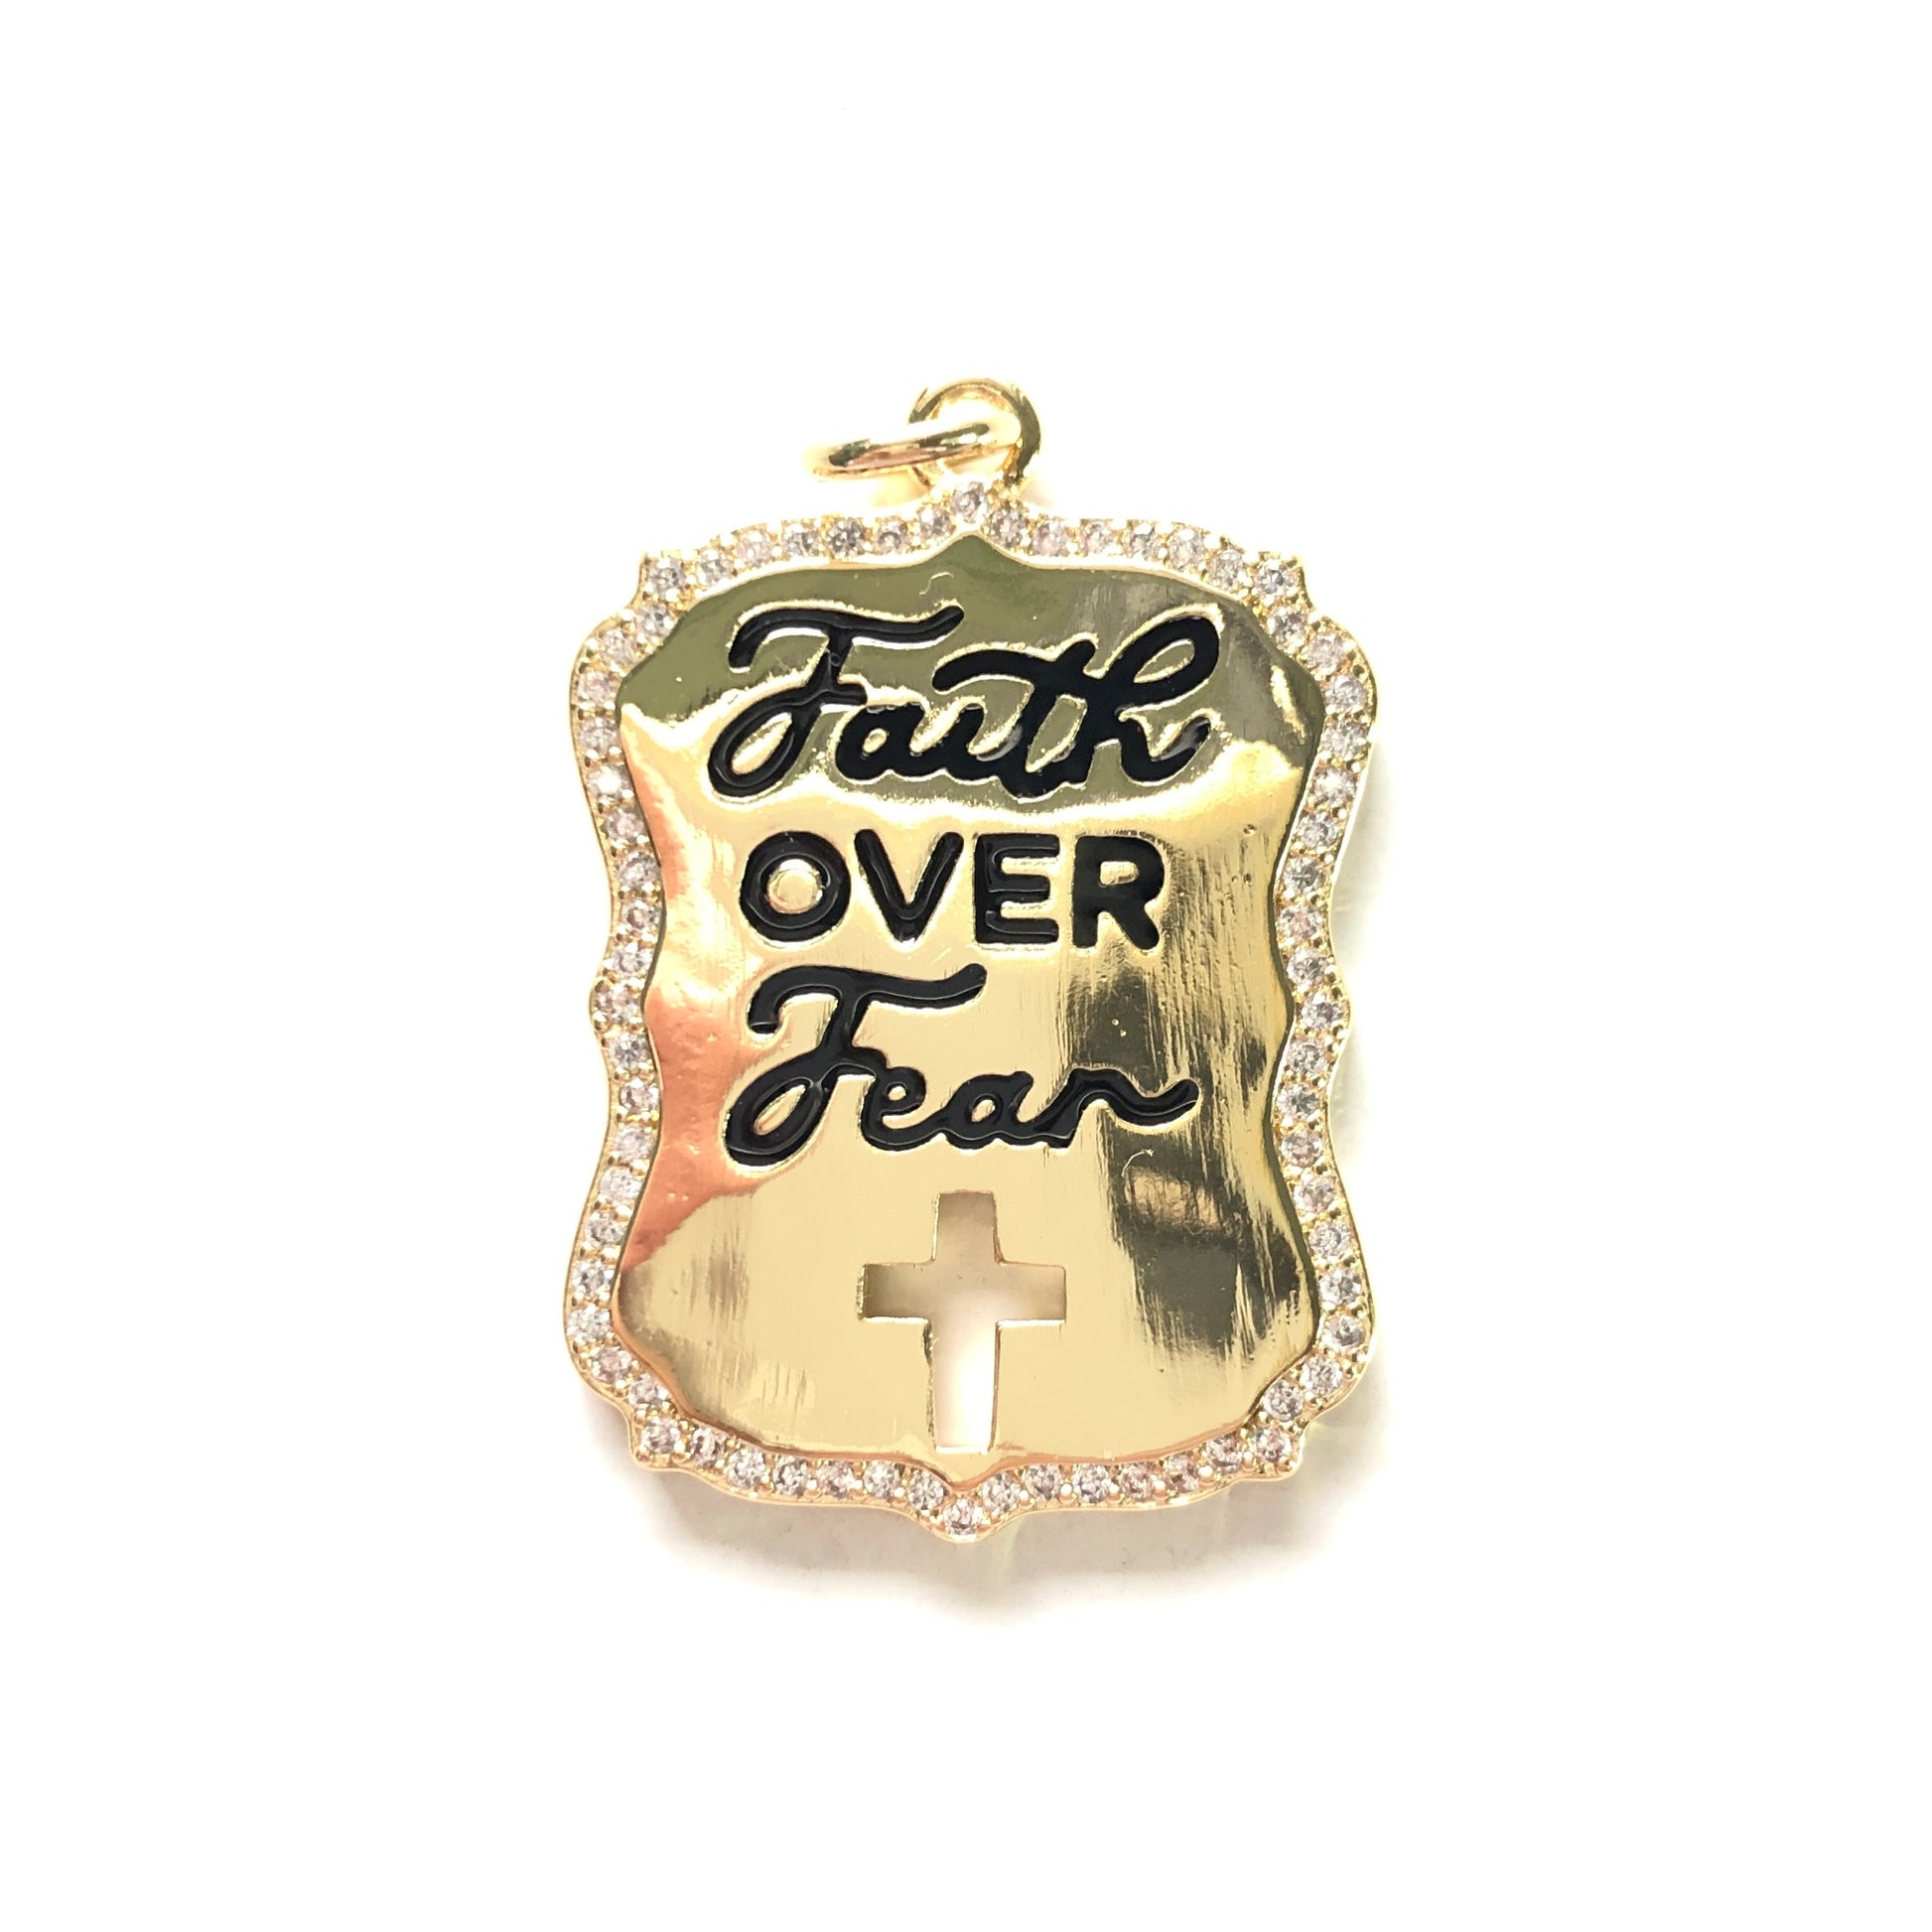 10pcs/lot CZ Paved Faith Over Fear Word Tags Charms Gold CZ Paved Charms Christian Quotes New Charms Arrivals Charms Beads Beyond